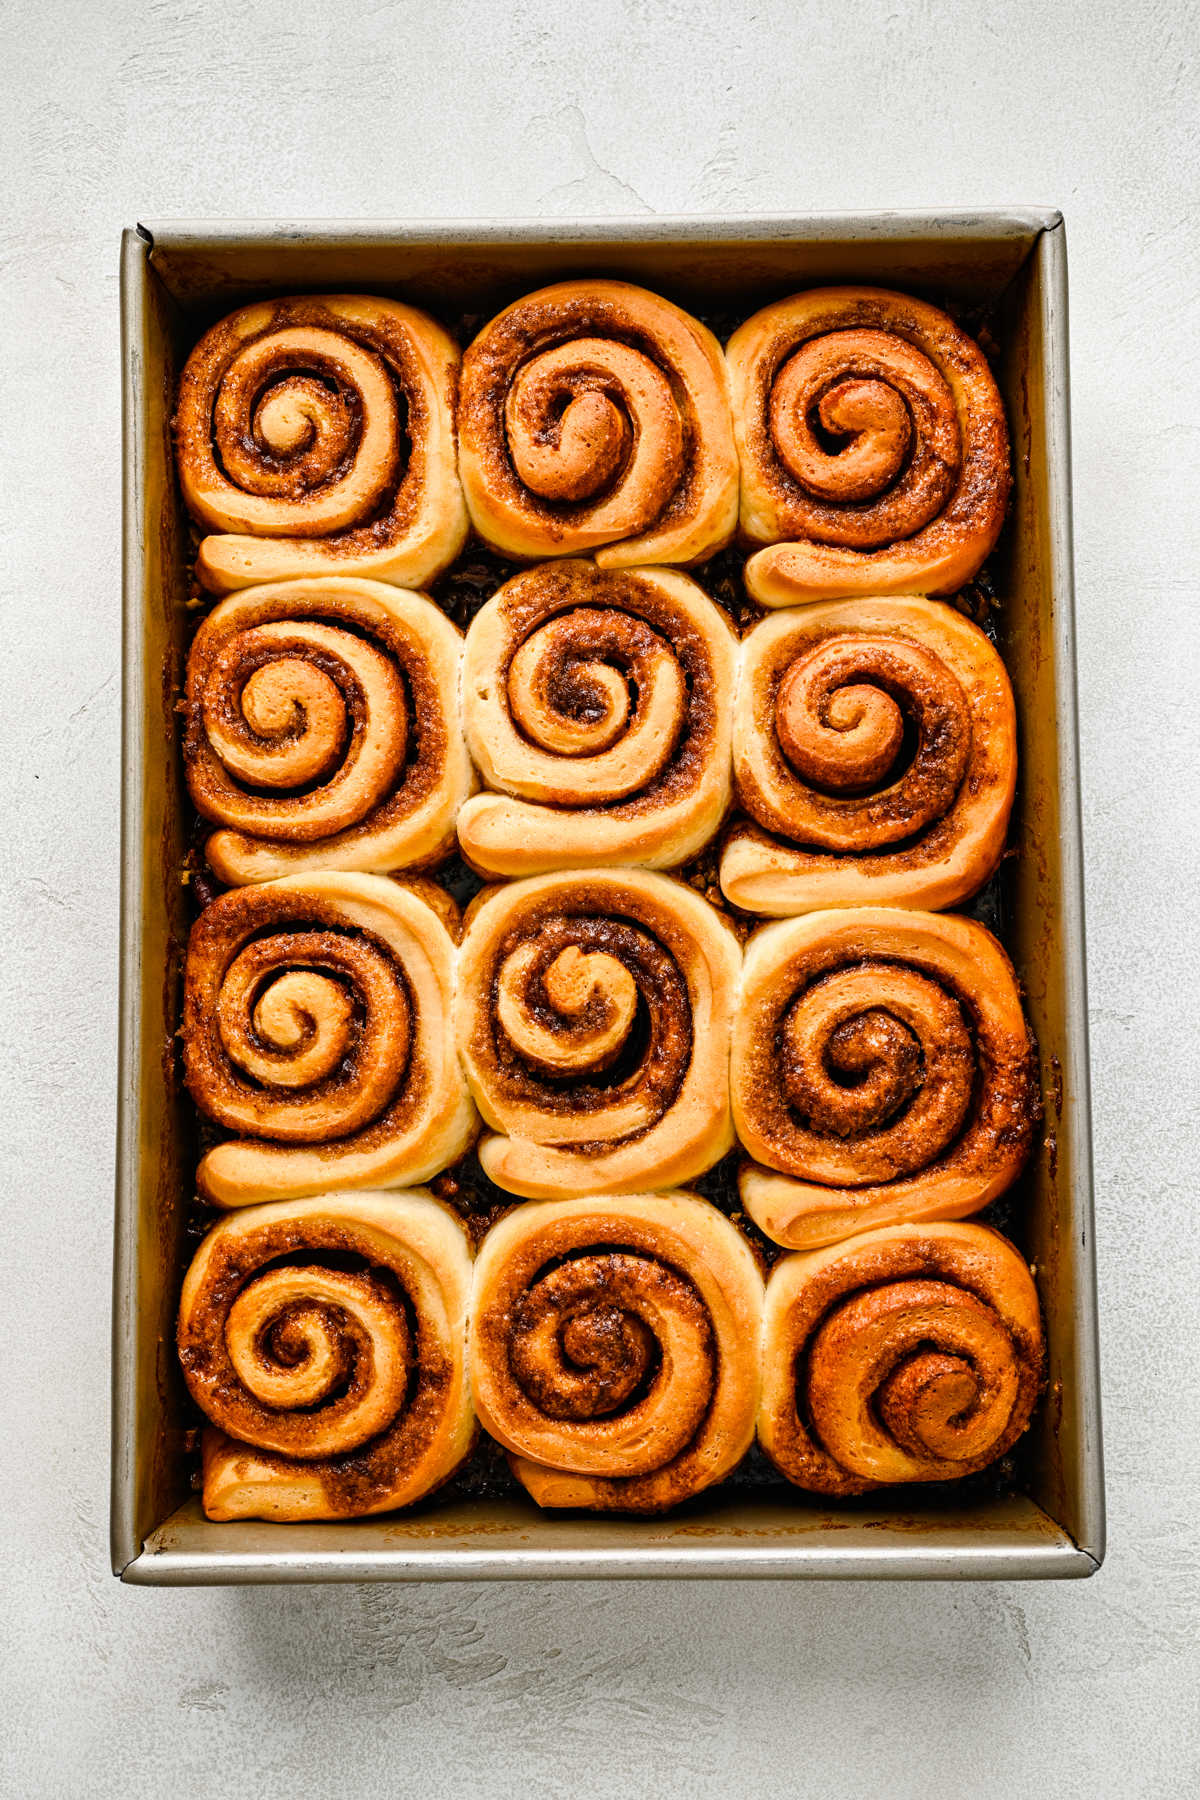 Baked sticky buns in a metal baking pan.